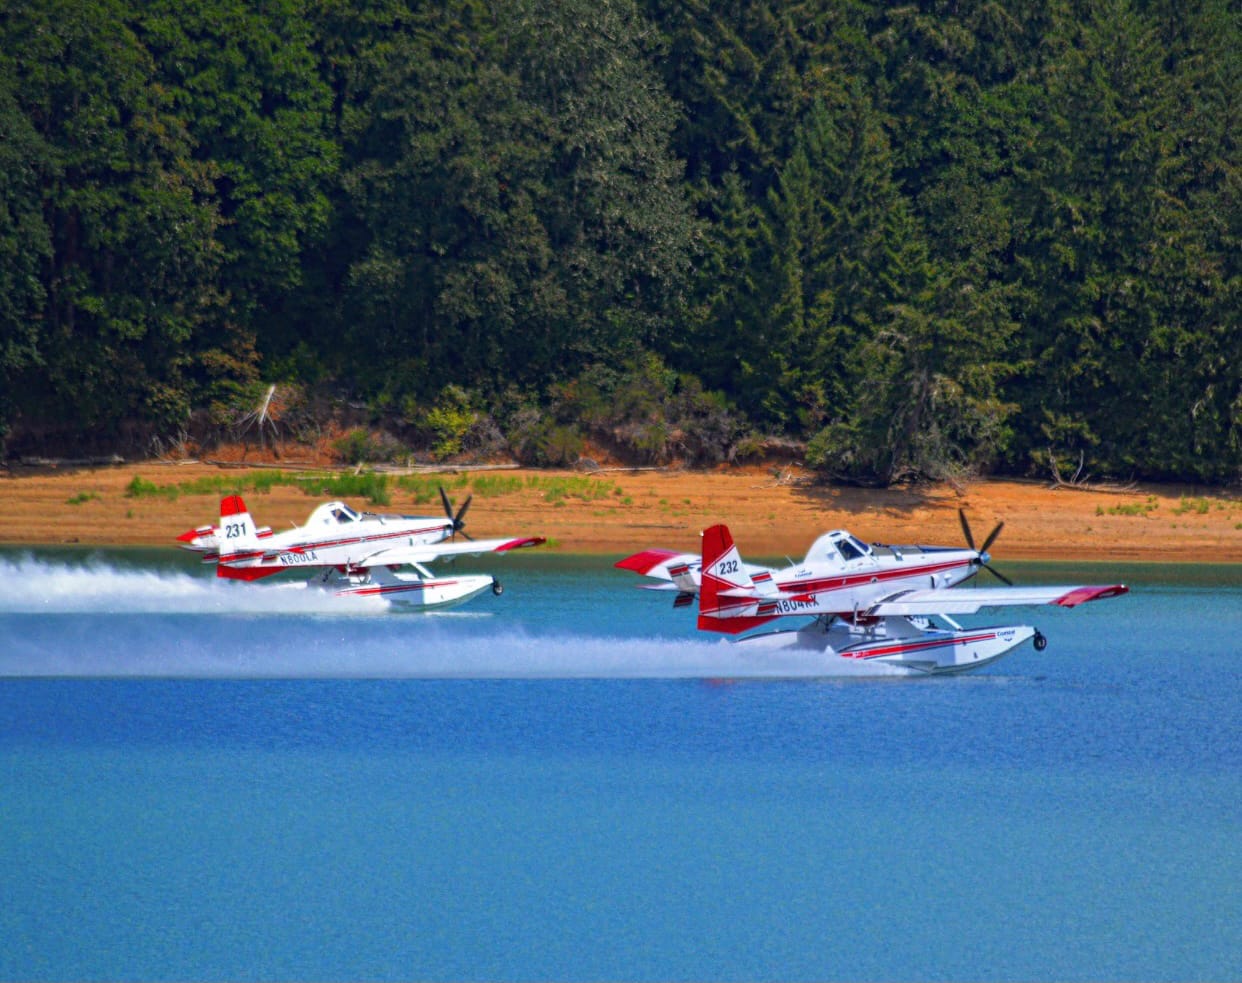 Planes on water